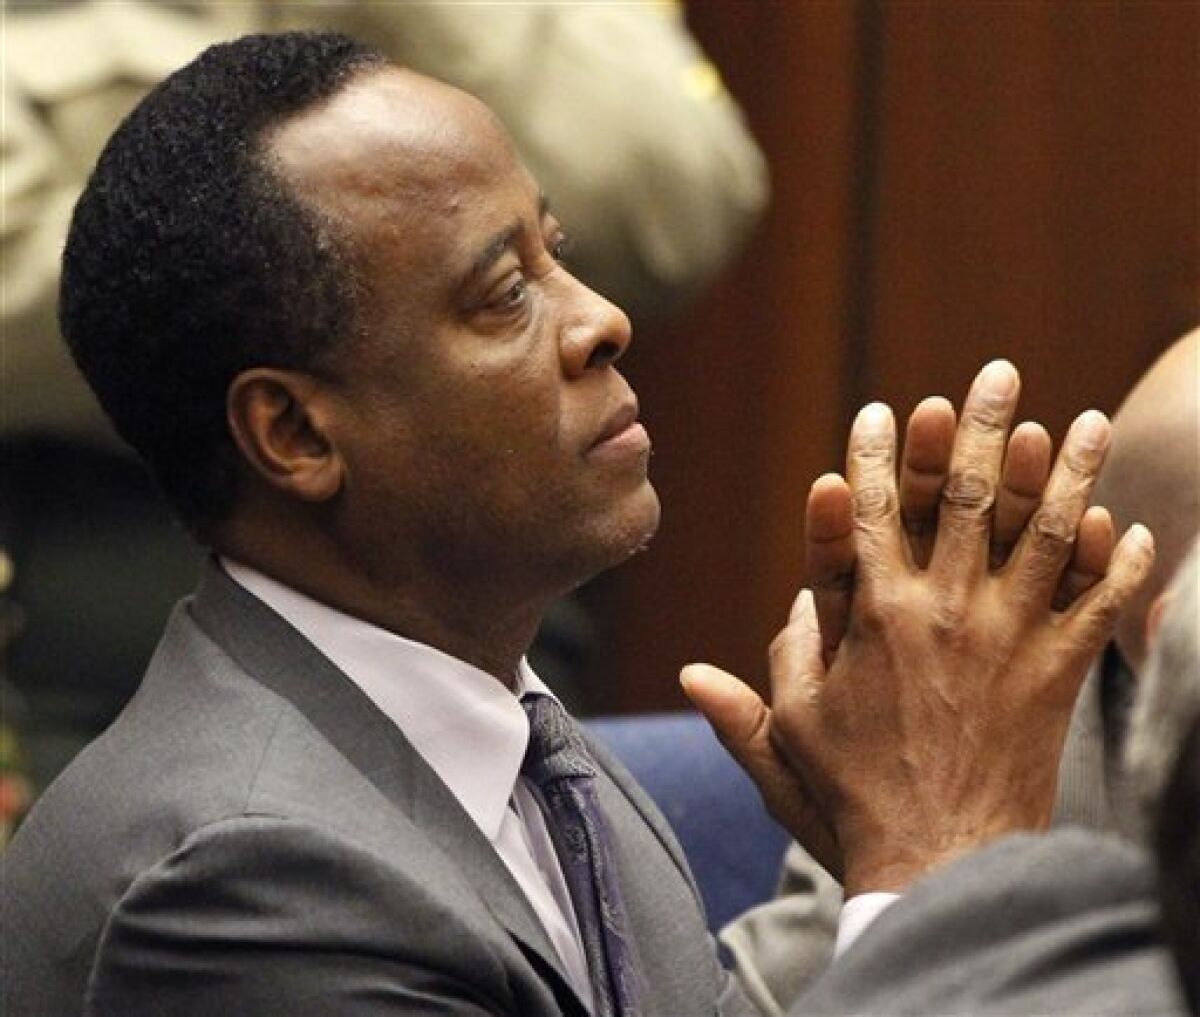 Dr. Conrad Murray sits in court after he was sentenced to four years in county jail for his involuntary manslaughter conviction in the death of pop star Michael Jackson on Tuesday, Nov. 29, 2011 in Superior Court in Los Angeles. (AP Photo/Mario Anzuoni, Pool)